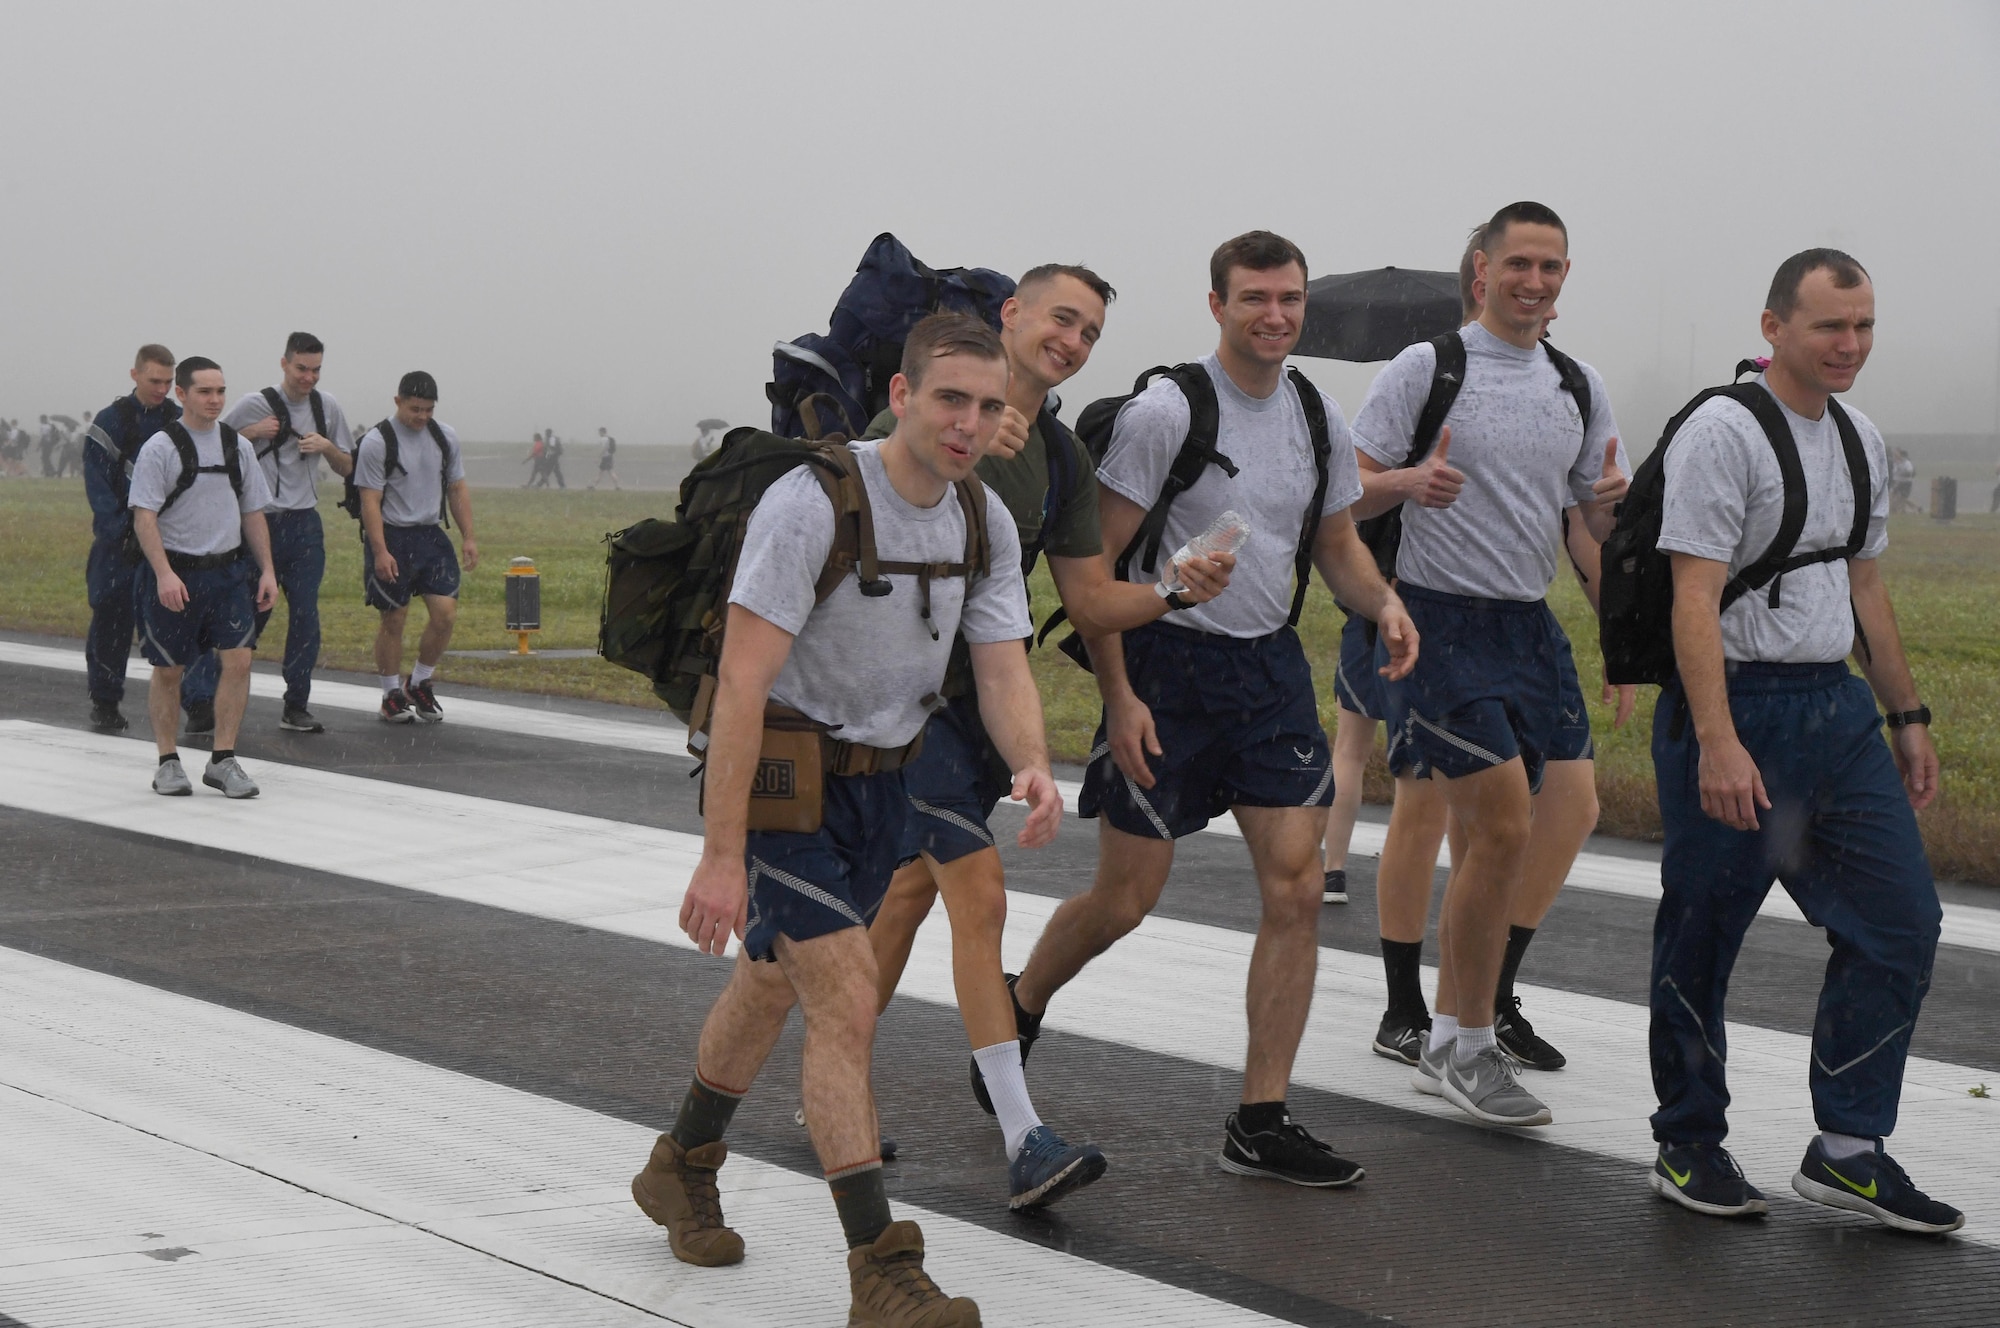 Keesler personnel participate in the Dragons March Fourth ruck march on the flightline at Keesler Air Force Base, Mississippi, March 4, 2020. Keesler personnel carried backpacks during the three-mile walk which symbolized the weight one carries through life. (U.S. Air Force photo by Kemberly Groue)